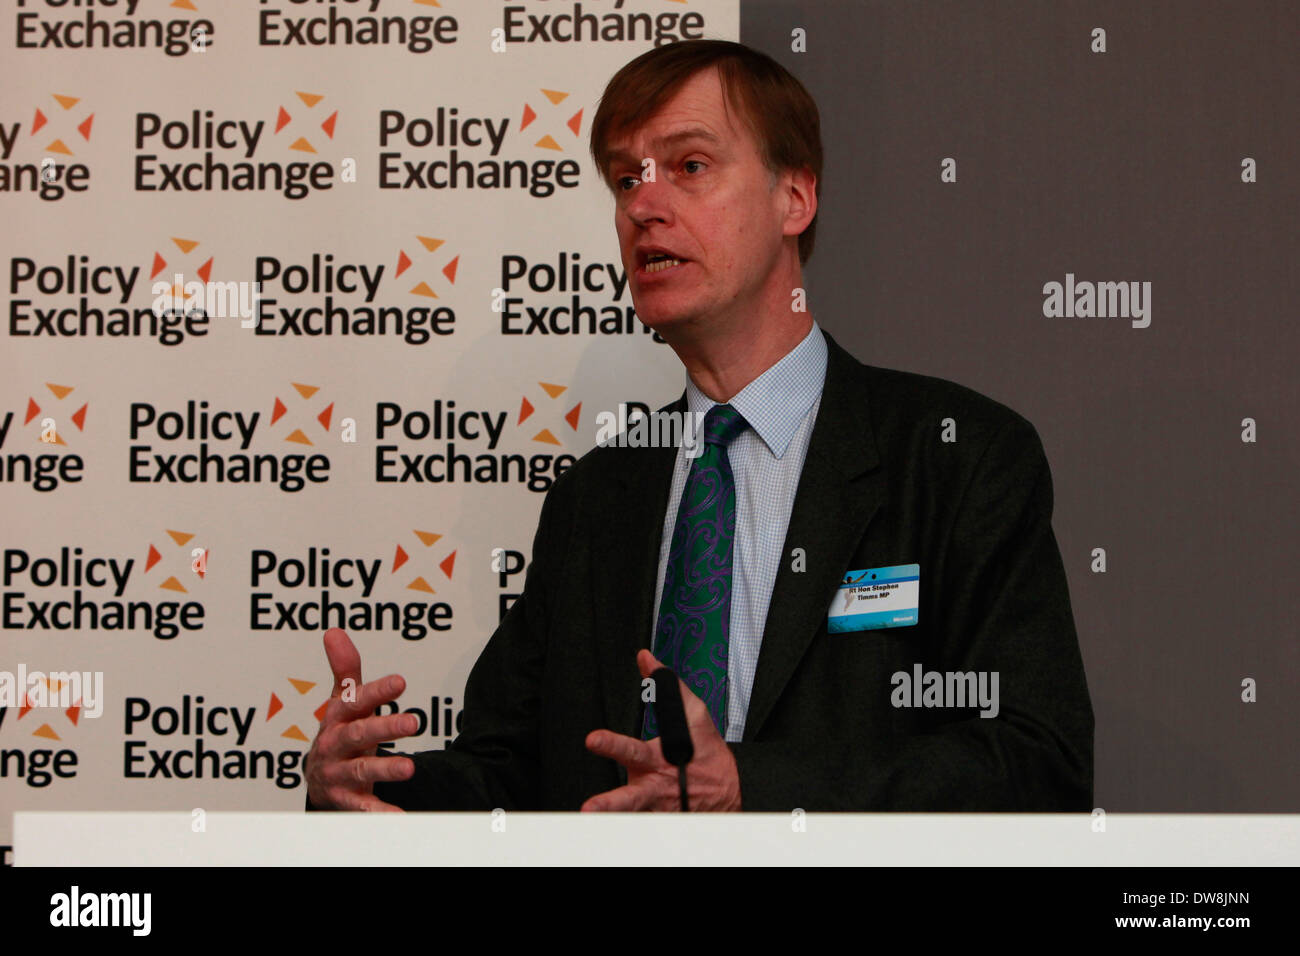 Rt Hon Stephen Timms MP, Shadow Minister for Employment is seen during the Policy Exchange conference in central London 18 April 2012, Policy Exchange is hosting a major full day conference looking at the future of the labour market and welfare and skills policy in the UK. Stock Photo